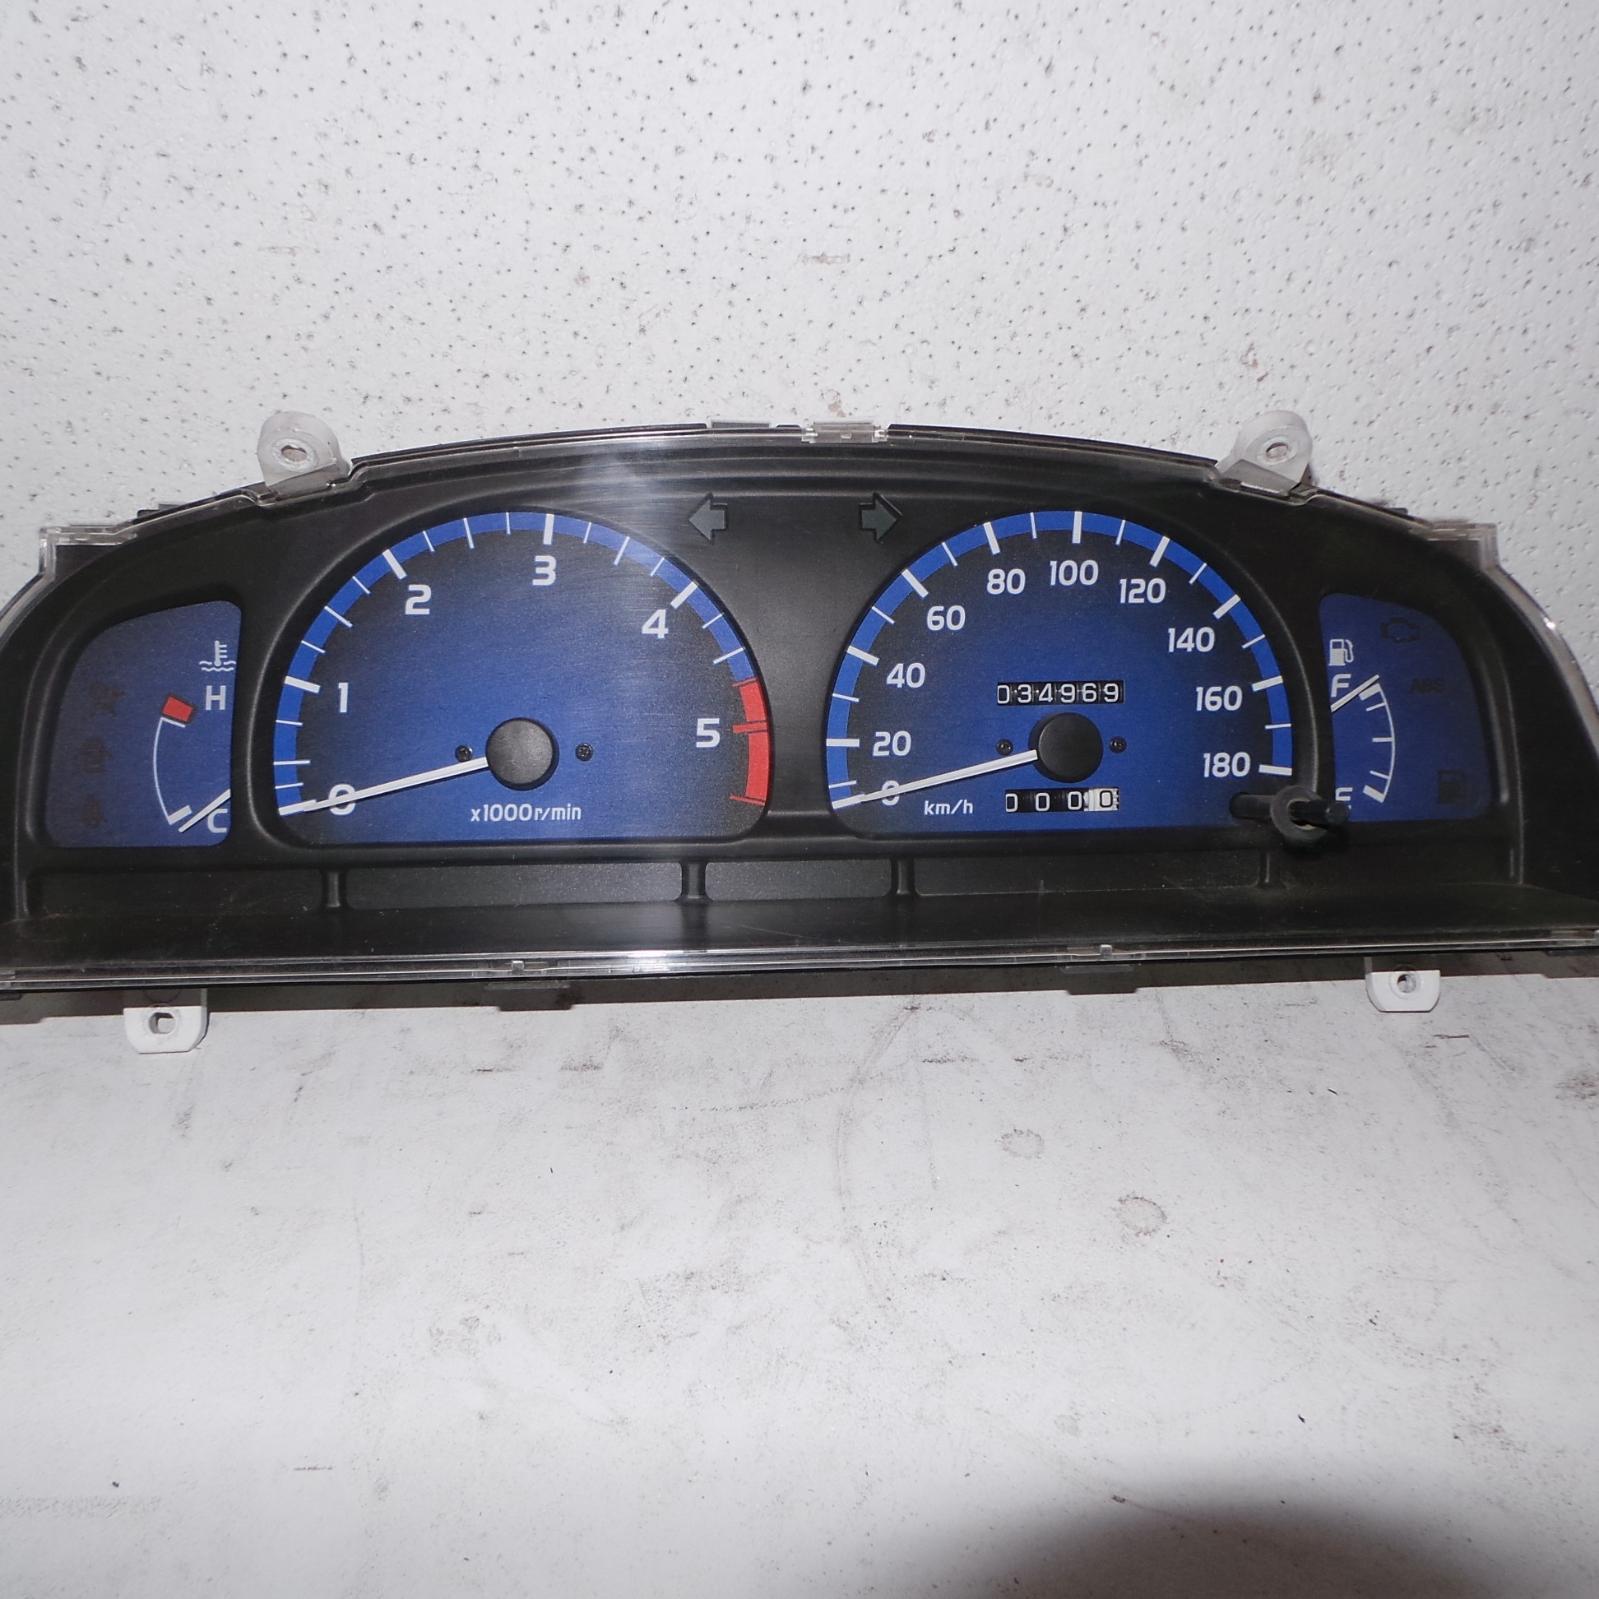 TOYOTA HILUX, Instrument Cluster, DIESEL, NON CABLE TYPE, 5000 RPM, 09/97-03/05